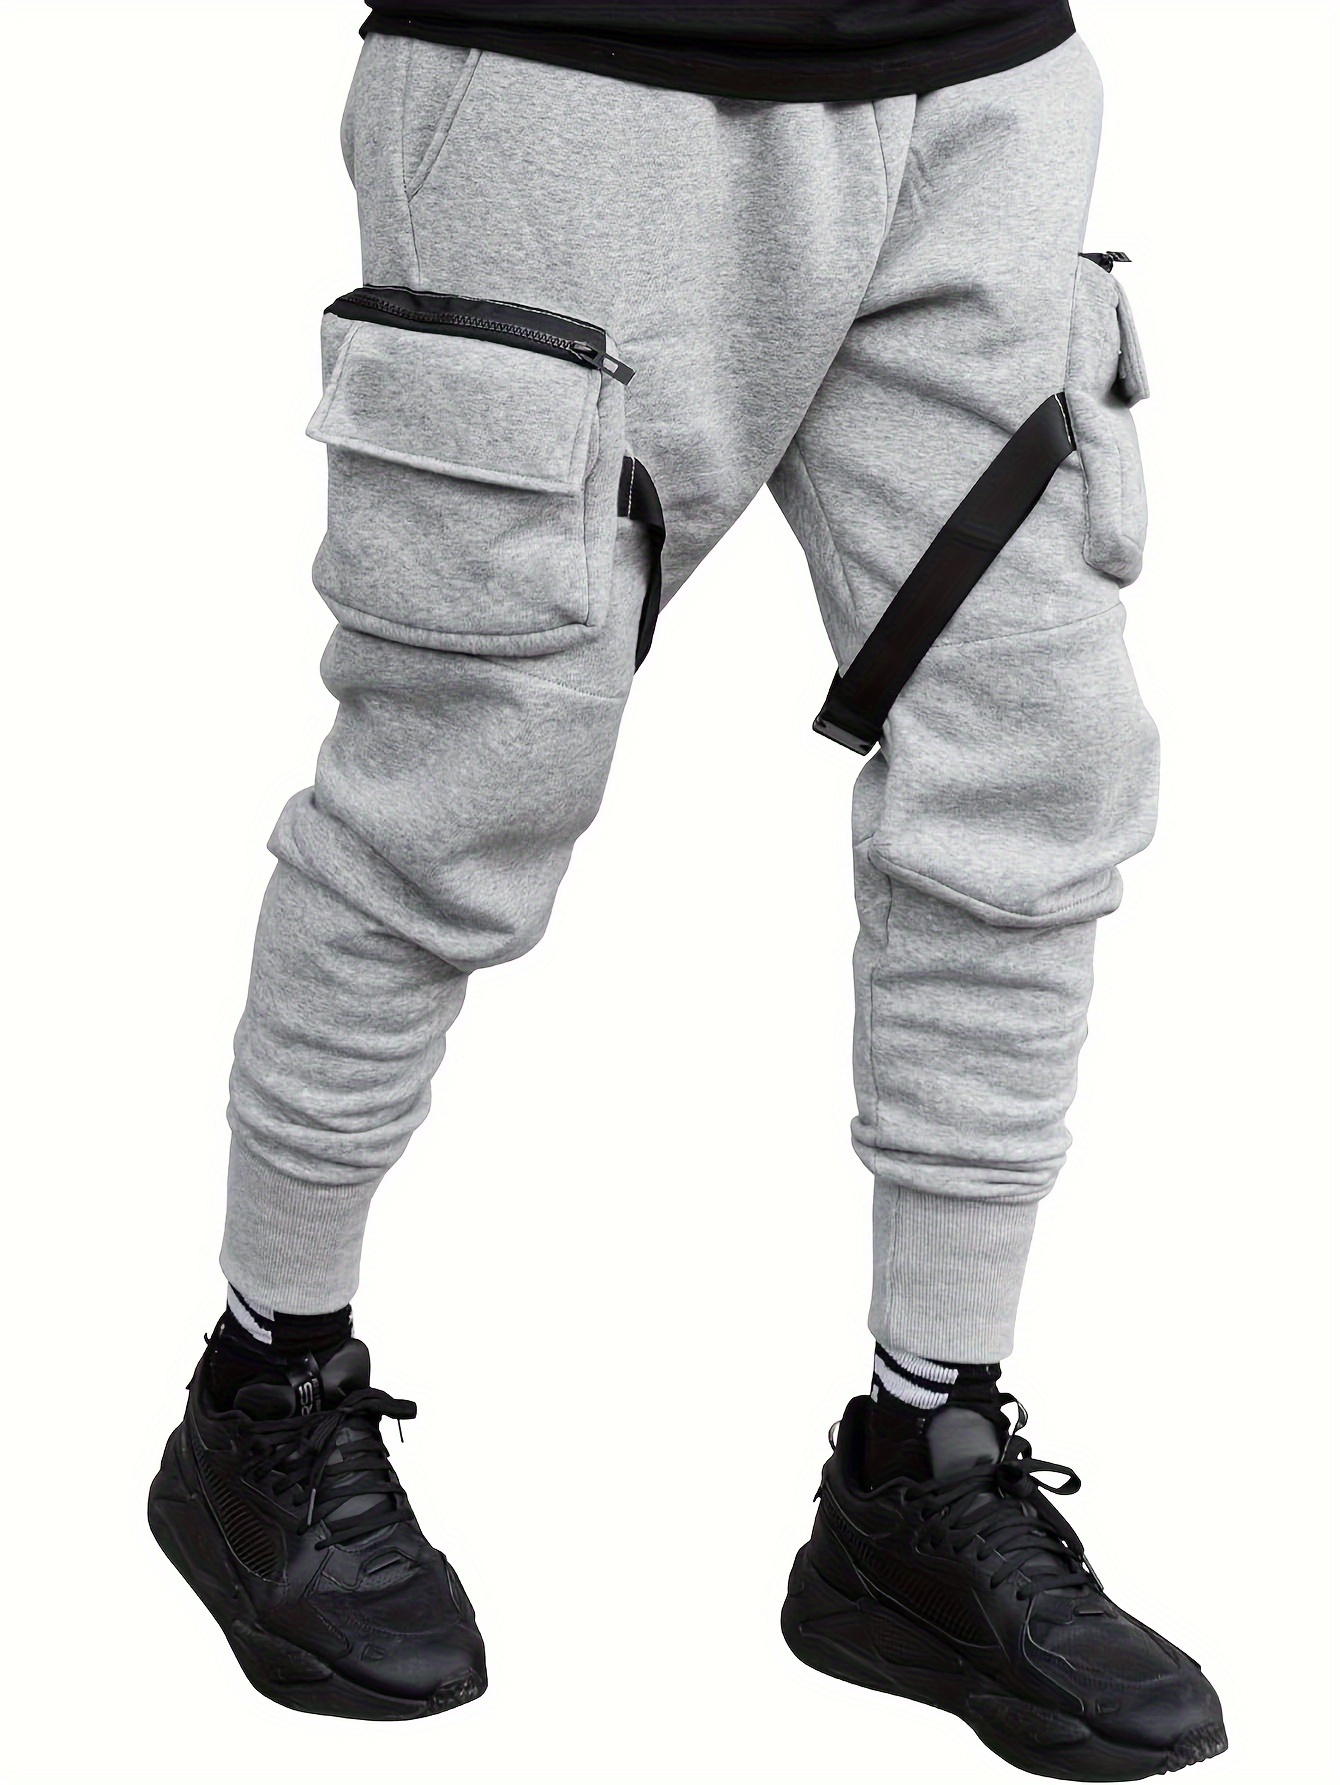 Mens Pants Pocket Drawstring Winter Solid Color Mens Sports Joggers Loose  Gym Thick Sweatpants Trousers